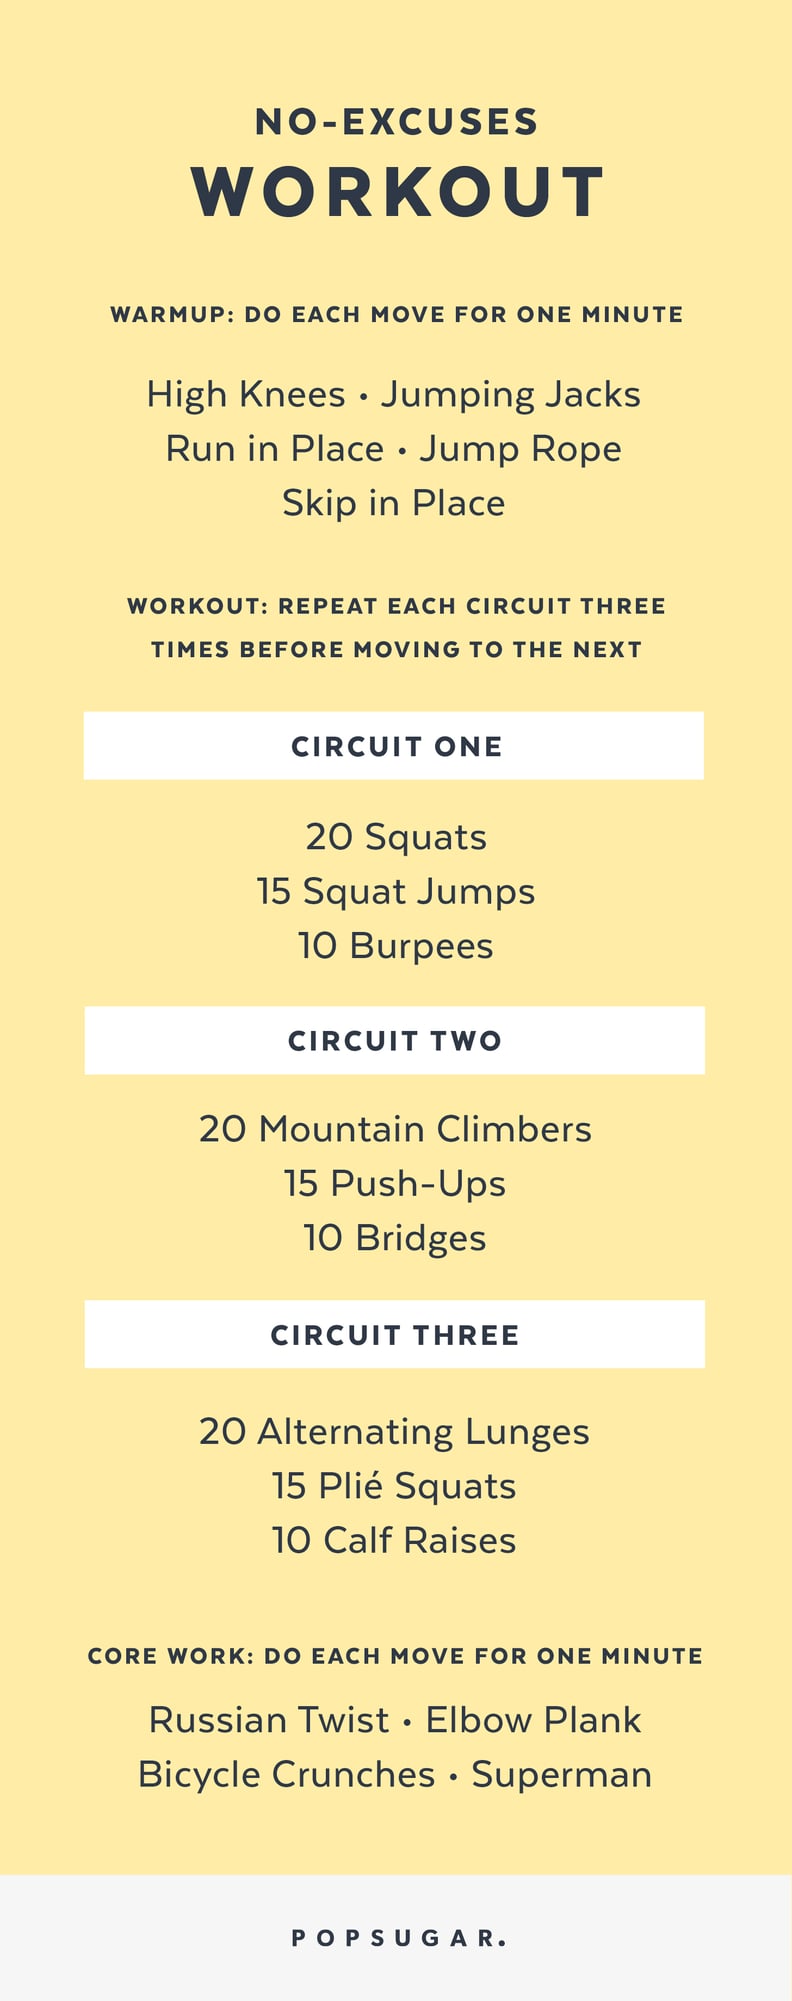 Your Do-Anywhere 1-Week Bodyweight Workout Guide